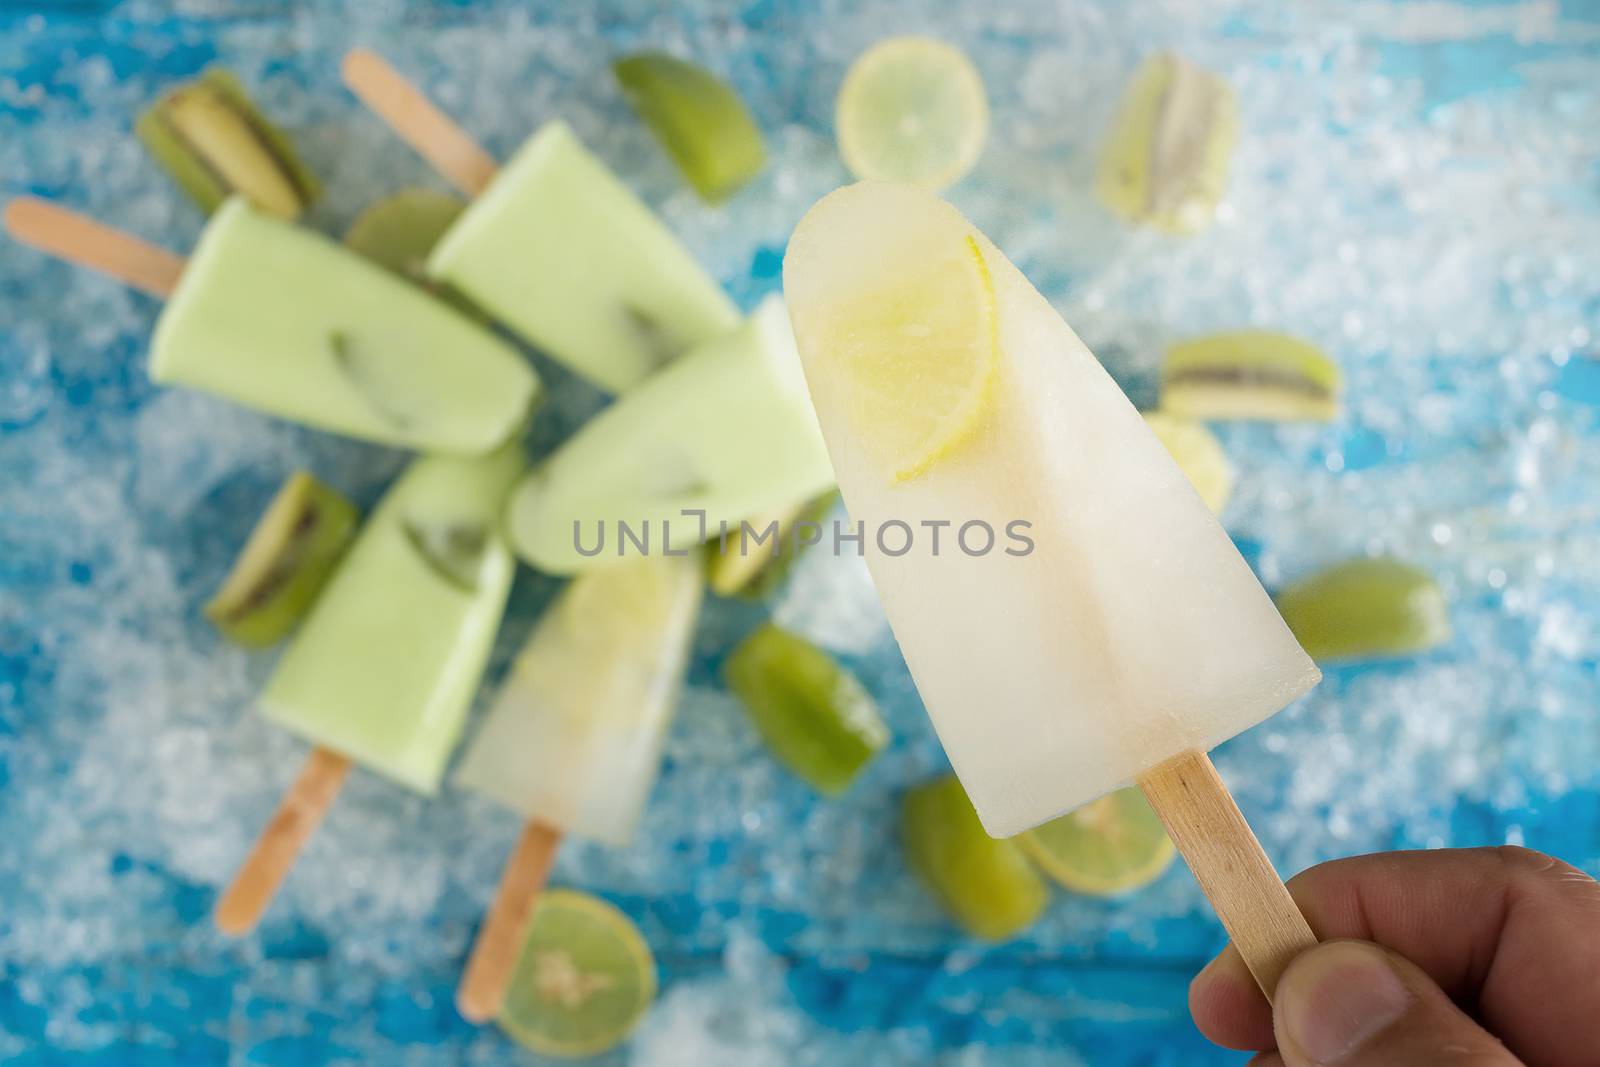 Crushed ice cubes and lemon, kiwi, homemade ice cream on vintage blue wooden table. Top view.